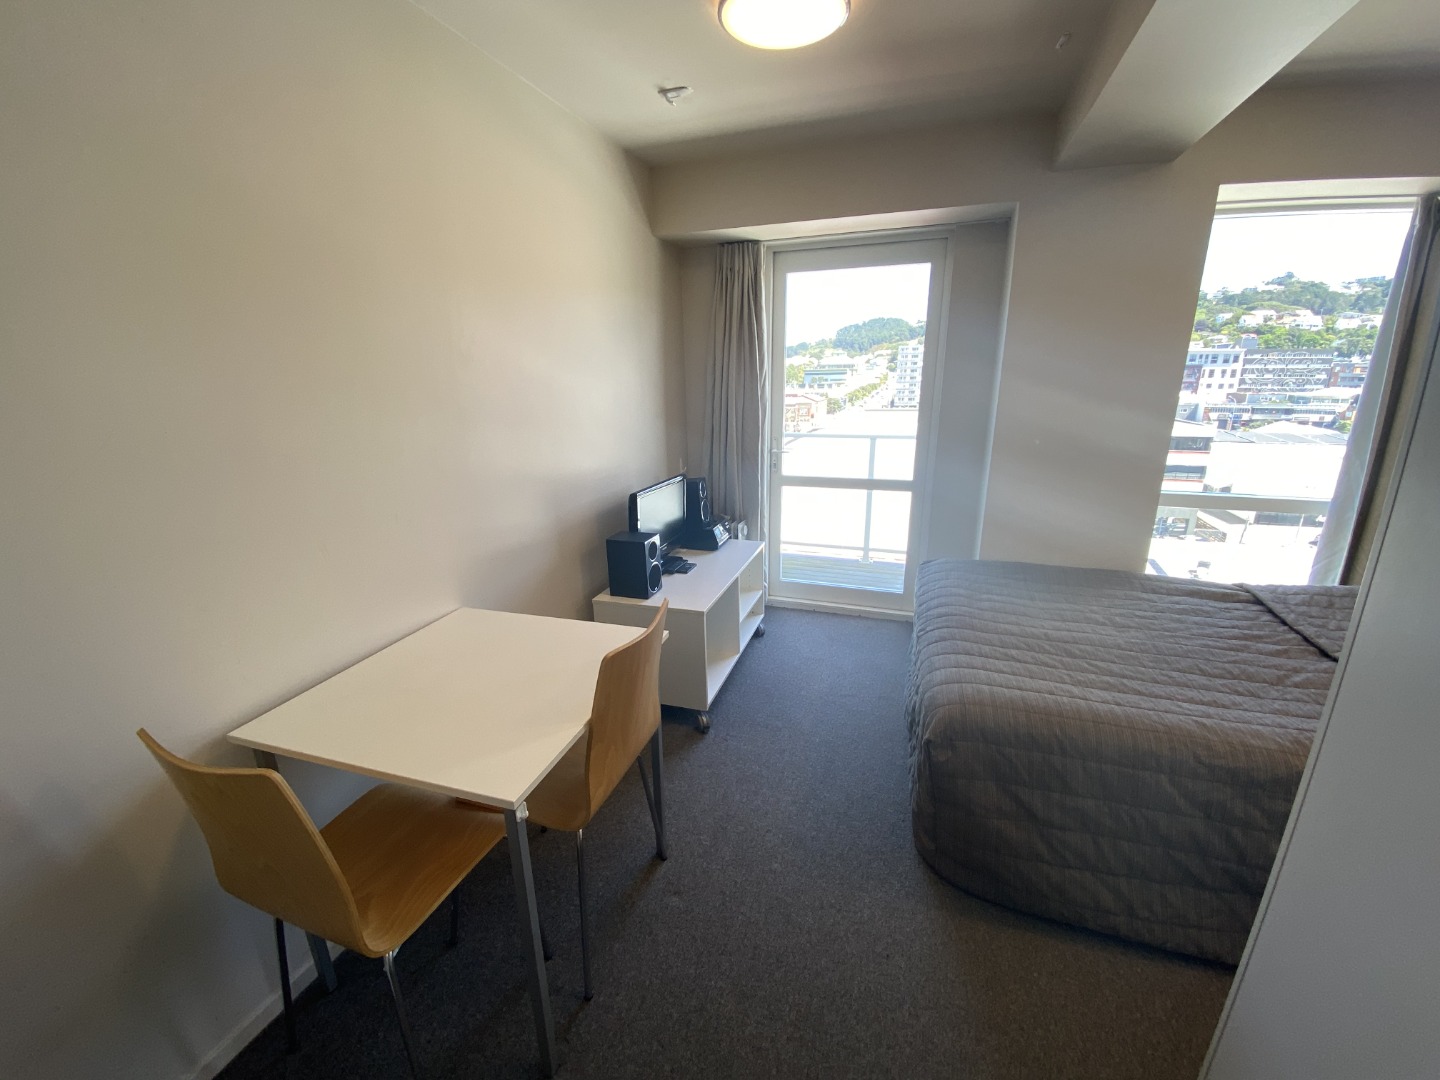 Real Estate For Rent Houses & Apartments : Views over Wellington - Furnished 1 bedroom Studio